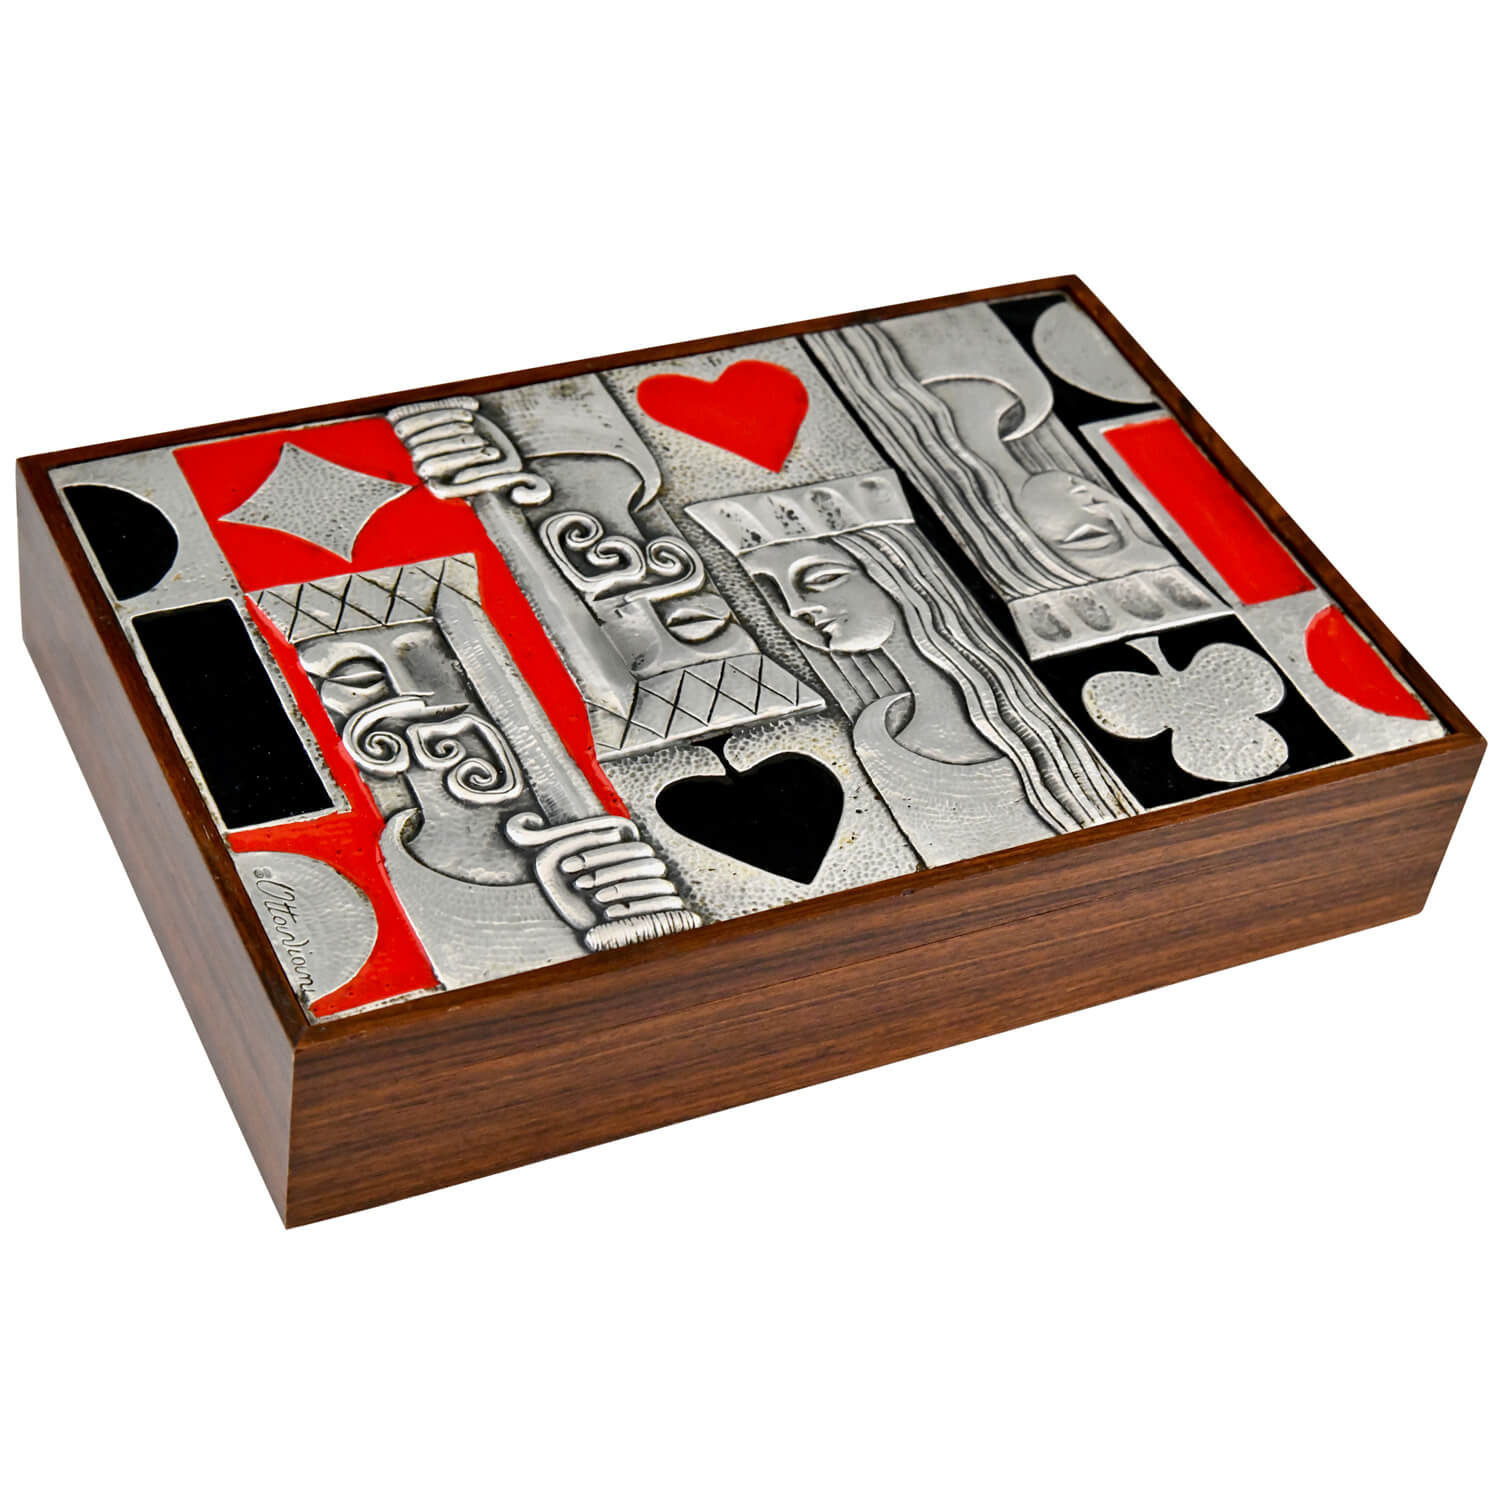 Ottaviani sterling silver, enamel and wood card playing box, Italy 1979. Signed Ottaviani, Sterling silver mark 925 mark.  Complete set of playing cards, dice, cup and chips.